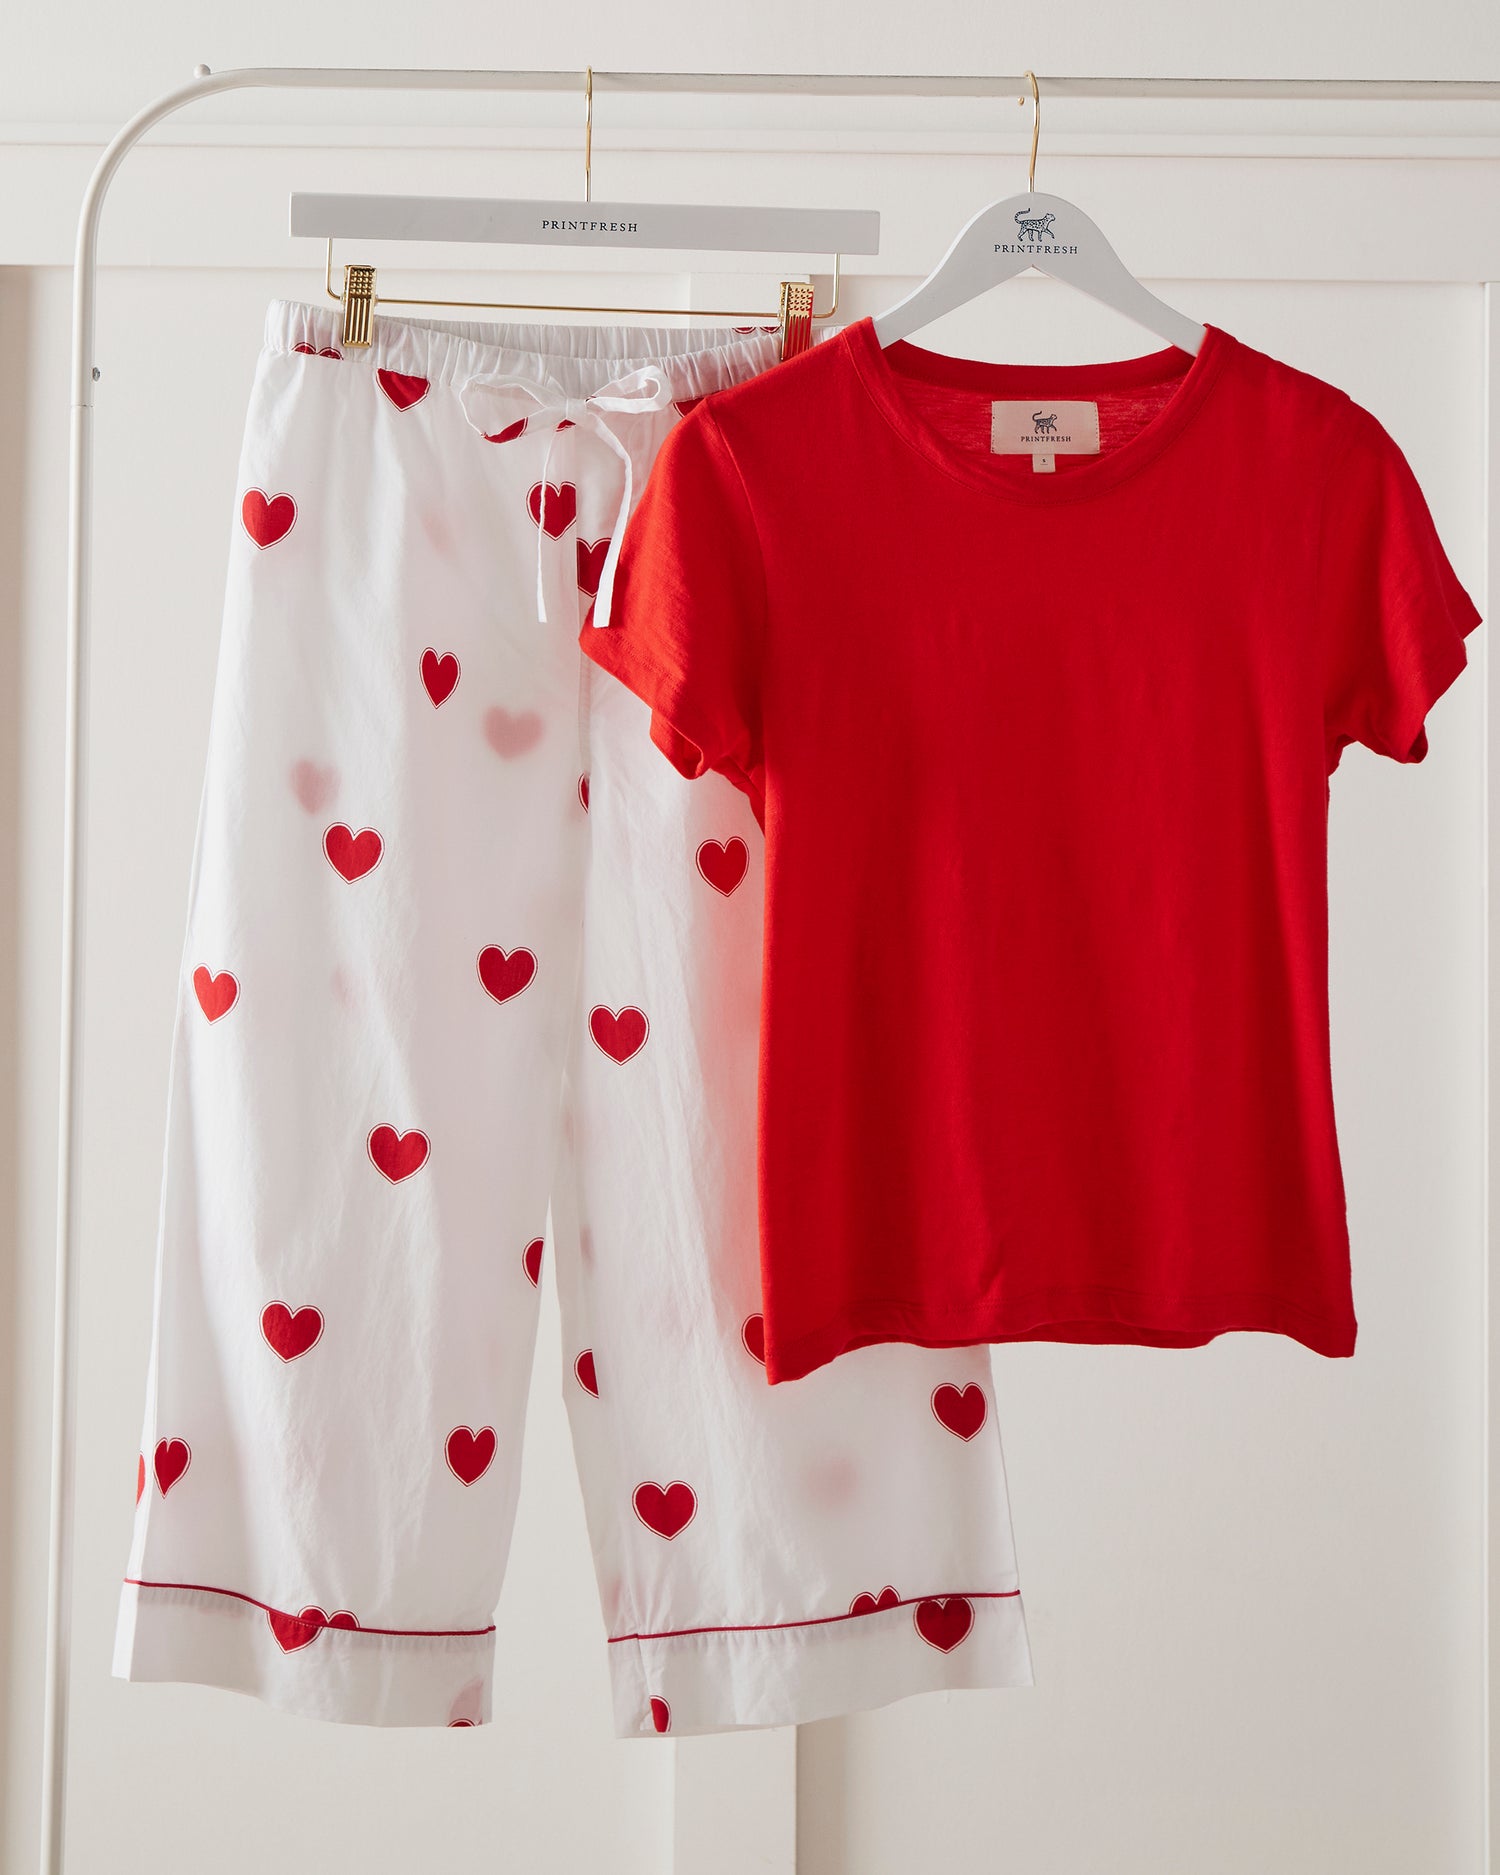 Queen of Hearts - T-Shirt and Cropped Pajama Pants Bundle - Ruby Cloud/Red Lip - Printfresh